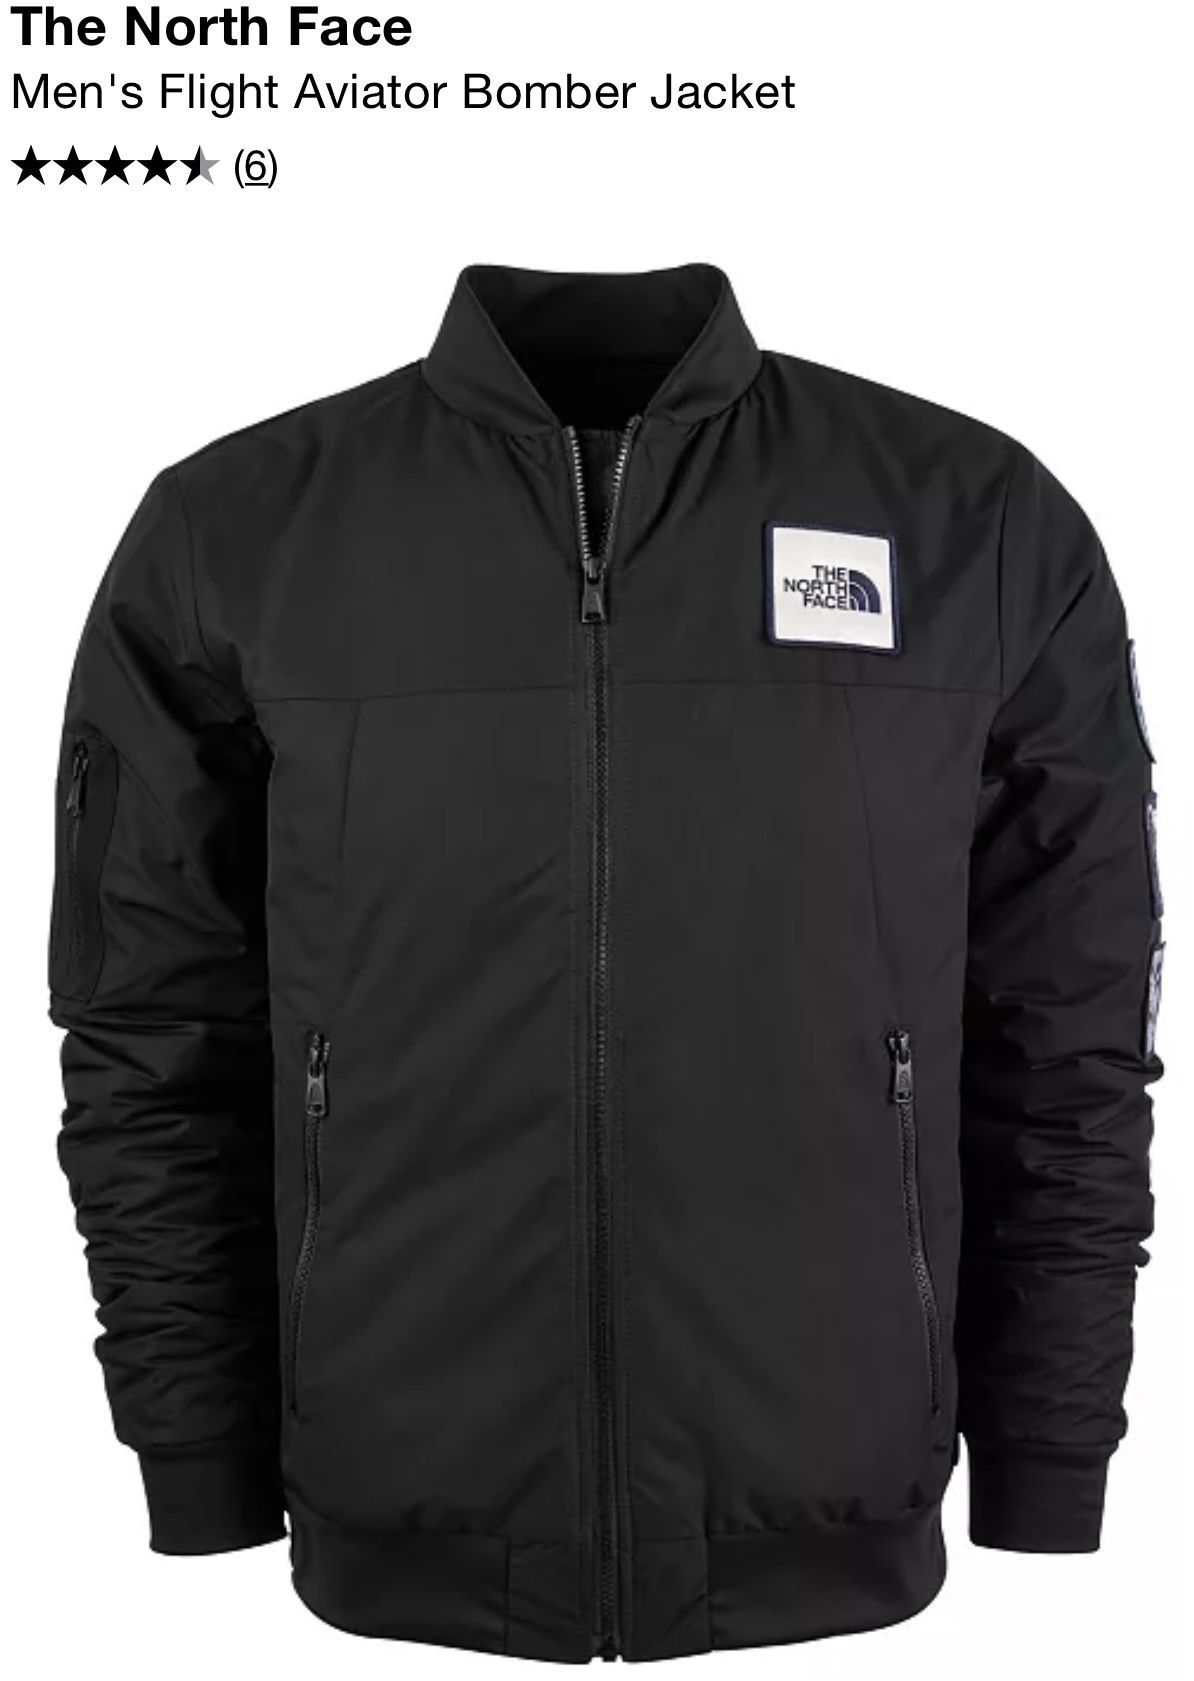 The North Face Men's Flight Aviator Bomber Jacket SIZE Medium Black. Pre-owned condition, make an offer!